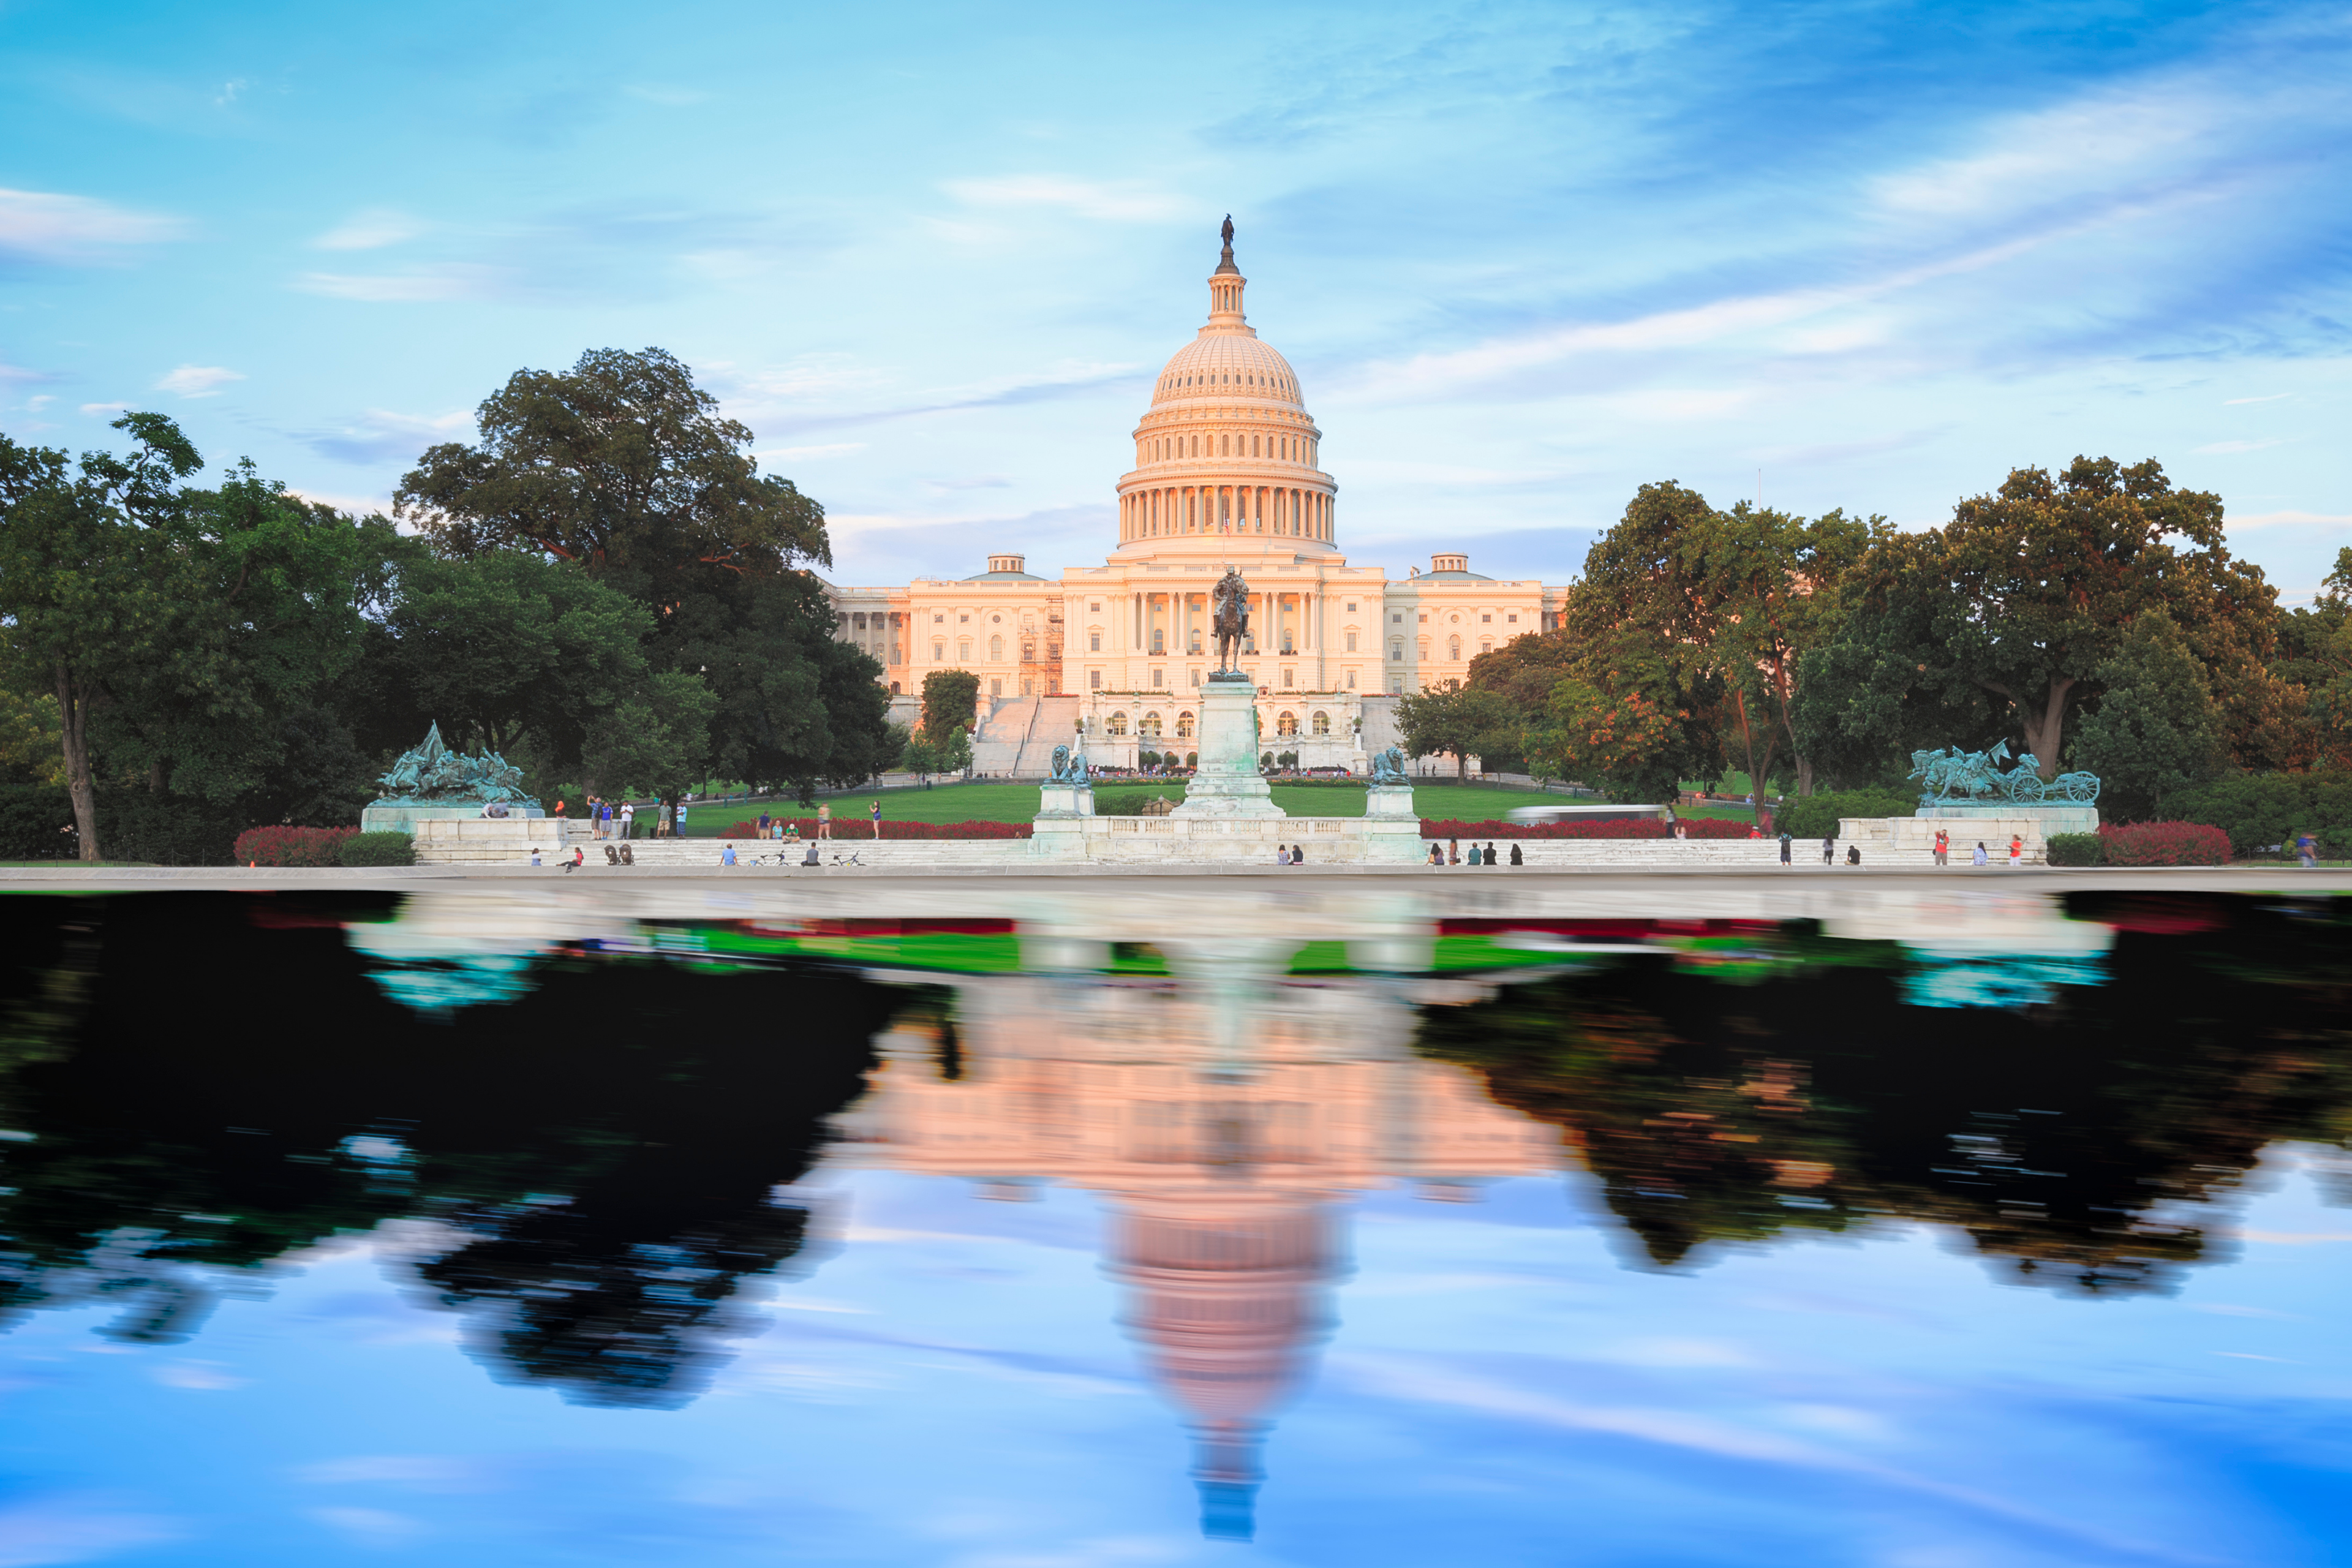 The Capitol building in Washington, DC, USA, set against a blue sky and reflected in blue water